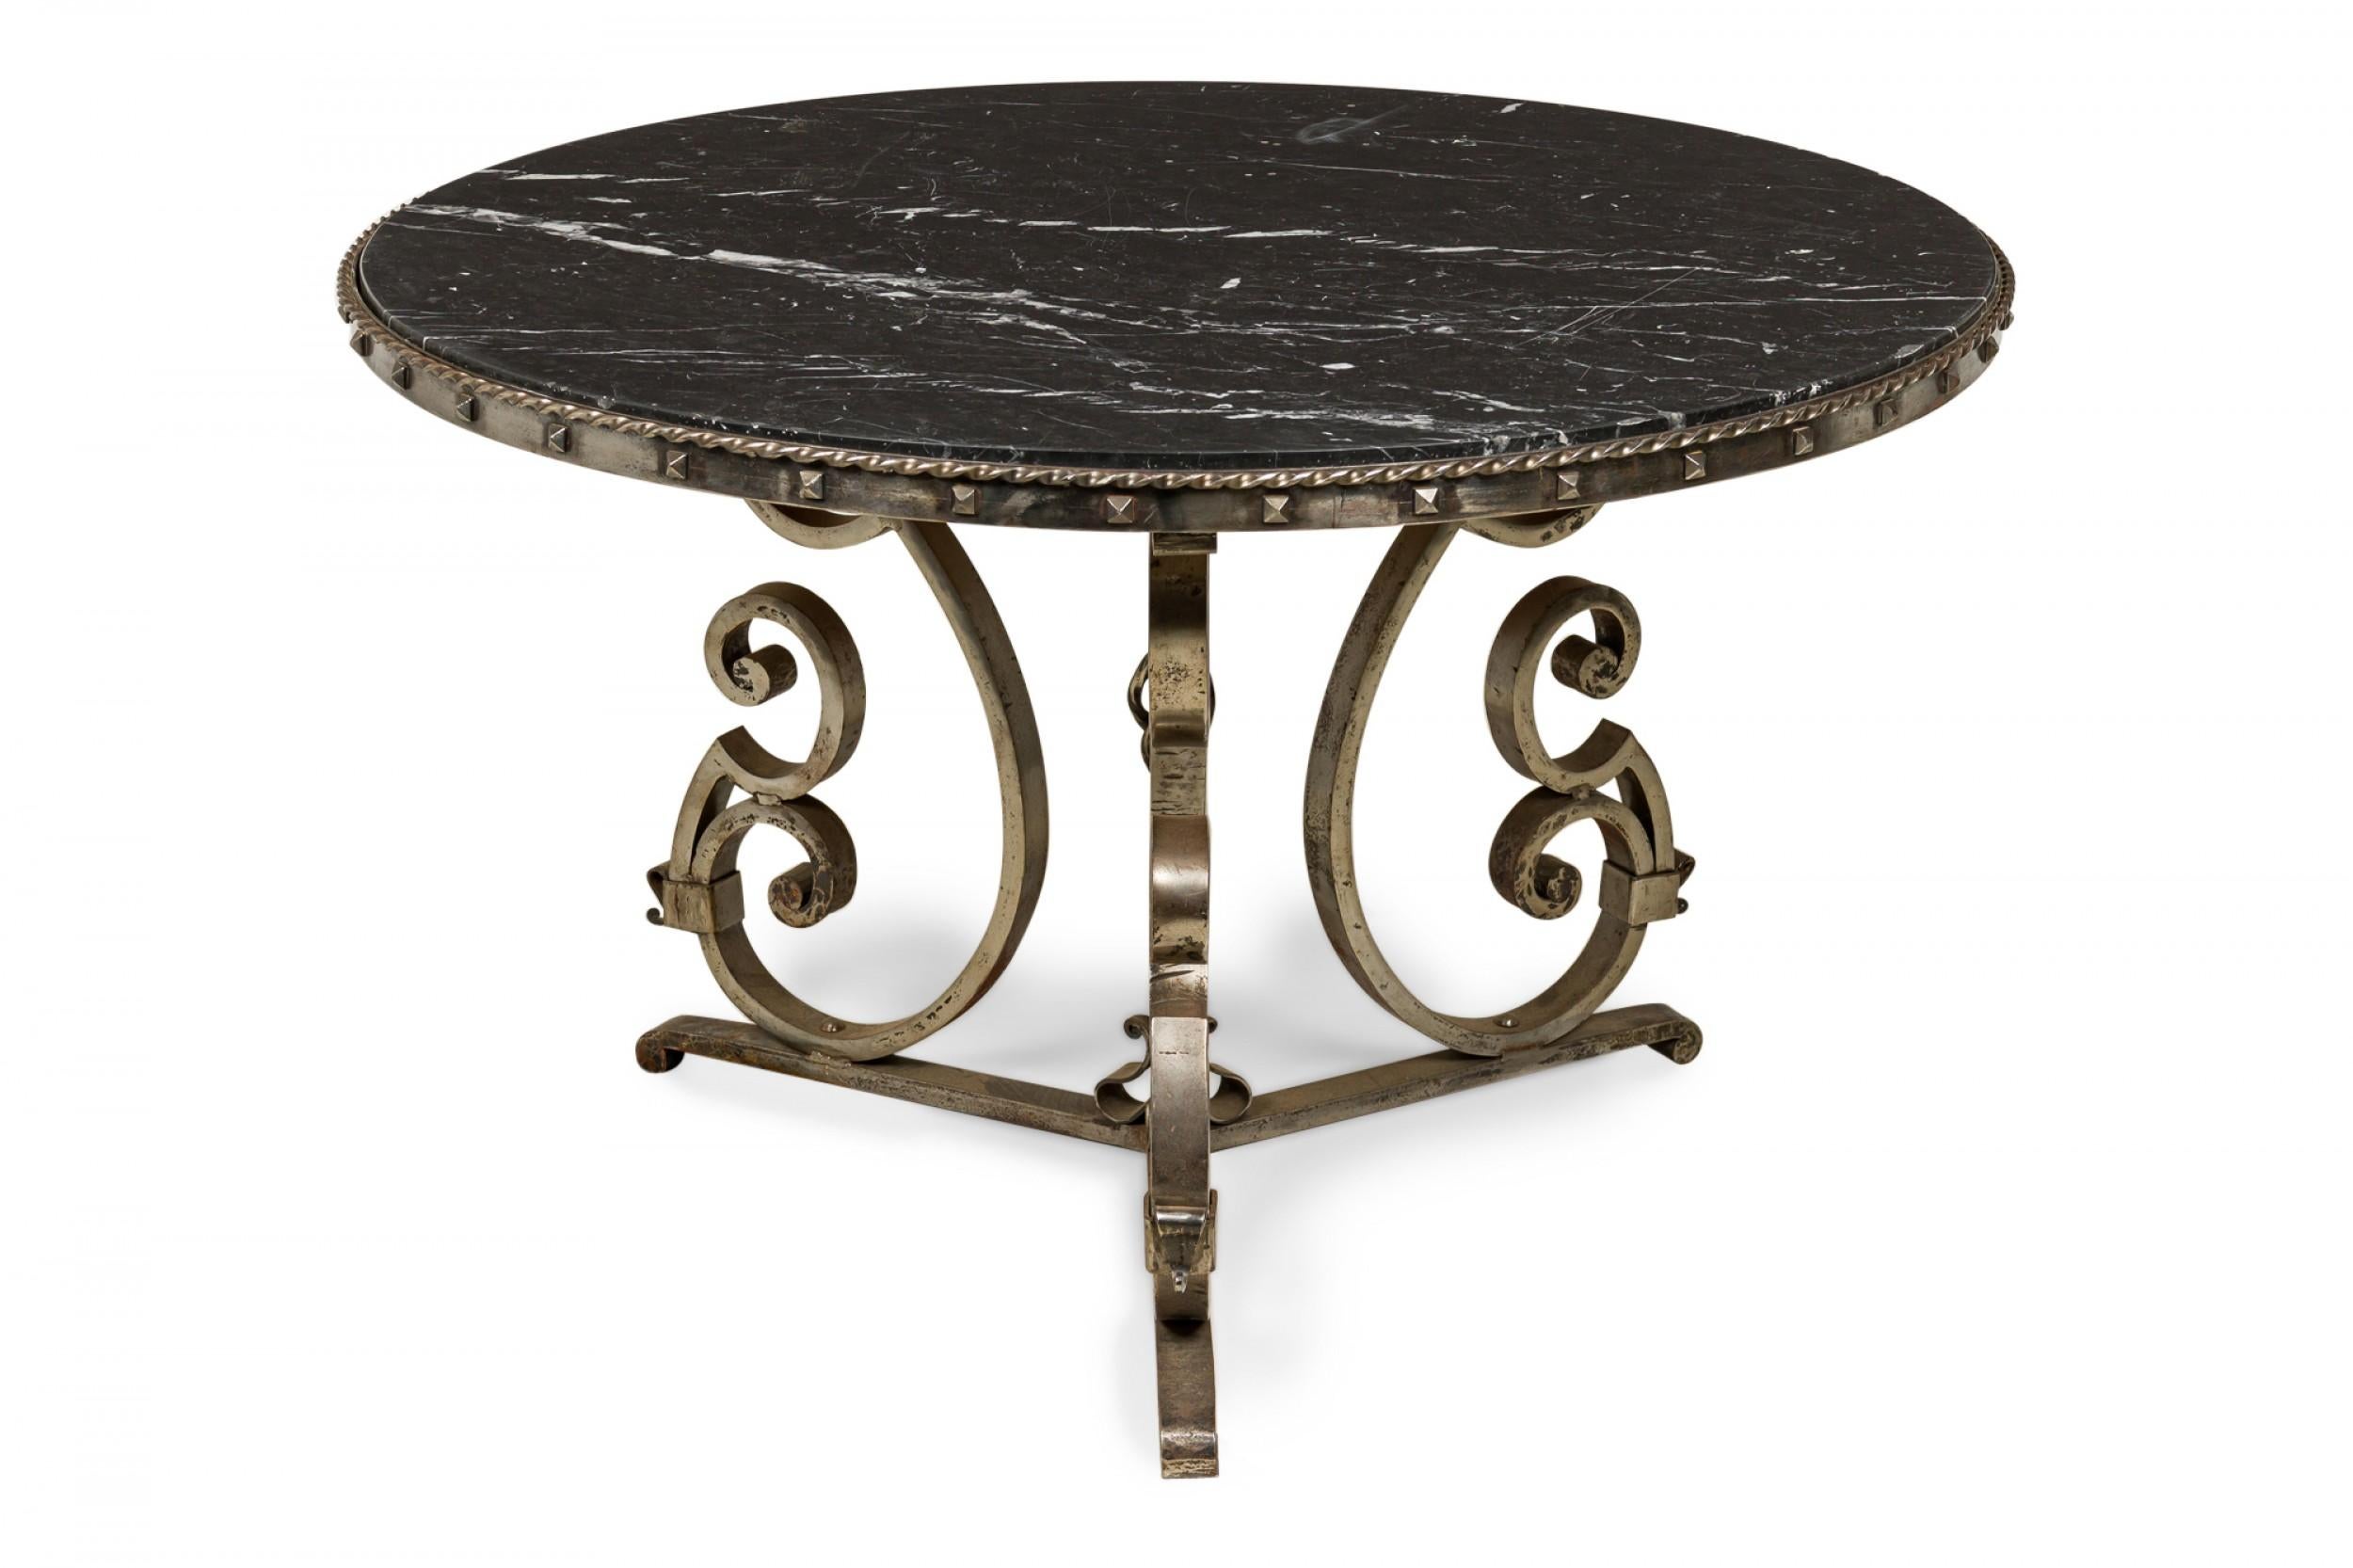 French Art Deco center table with a scroll form iron pedestal base with rope design trim and base finial and square iron studs around the tabletop frame, supporting a thick circular black marble top. (manner of RAYMOND SUBES).